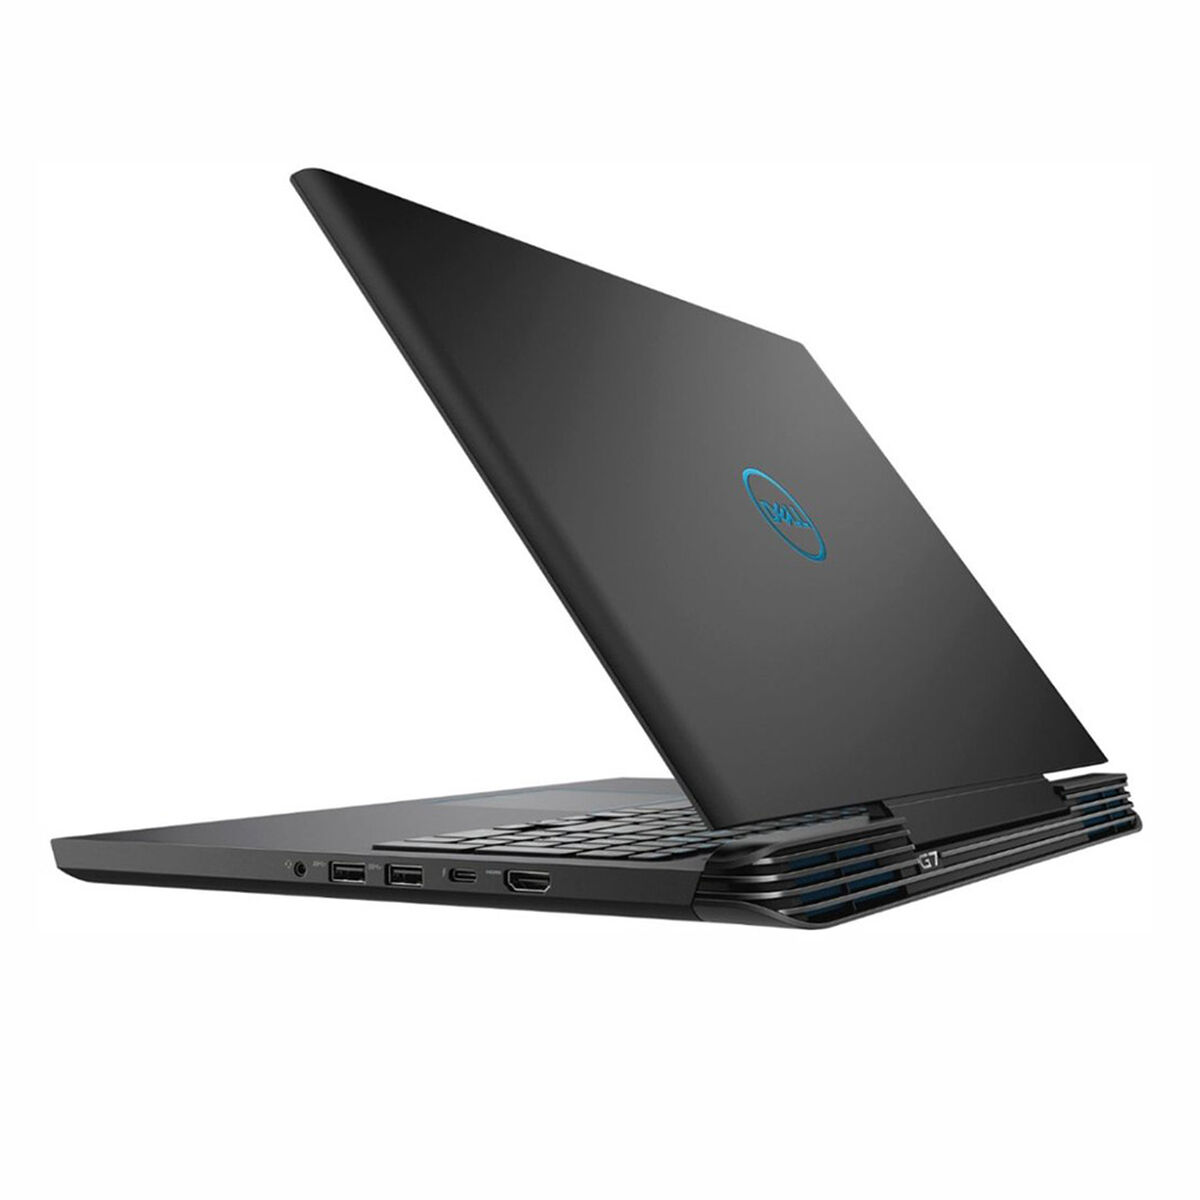 Notebook Gamer Dell Gaming 7588-7385 Core i7-8750H 8GB 256GB SSD 15.6" NVIDIA GTX1060